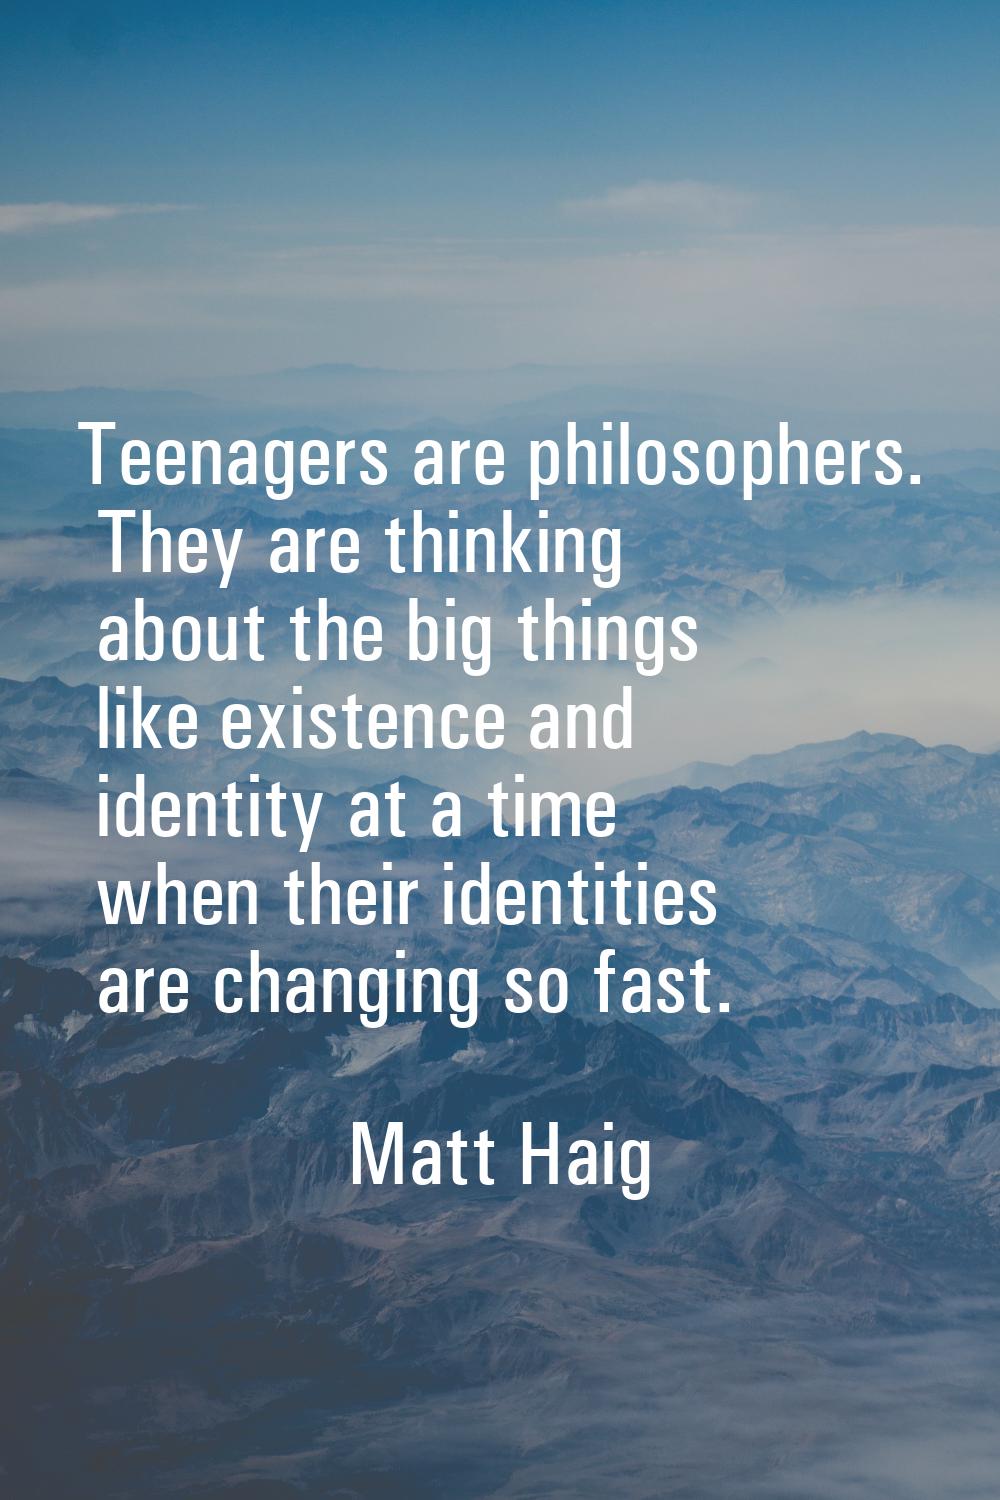 Teenagers are philosophers. They are thinking about the big things like existence and identity at a